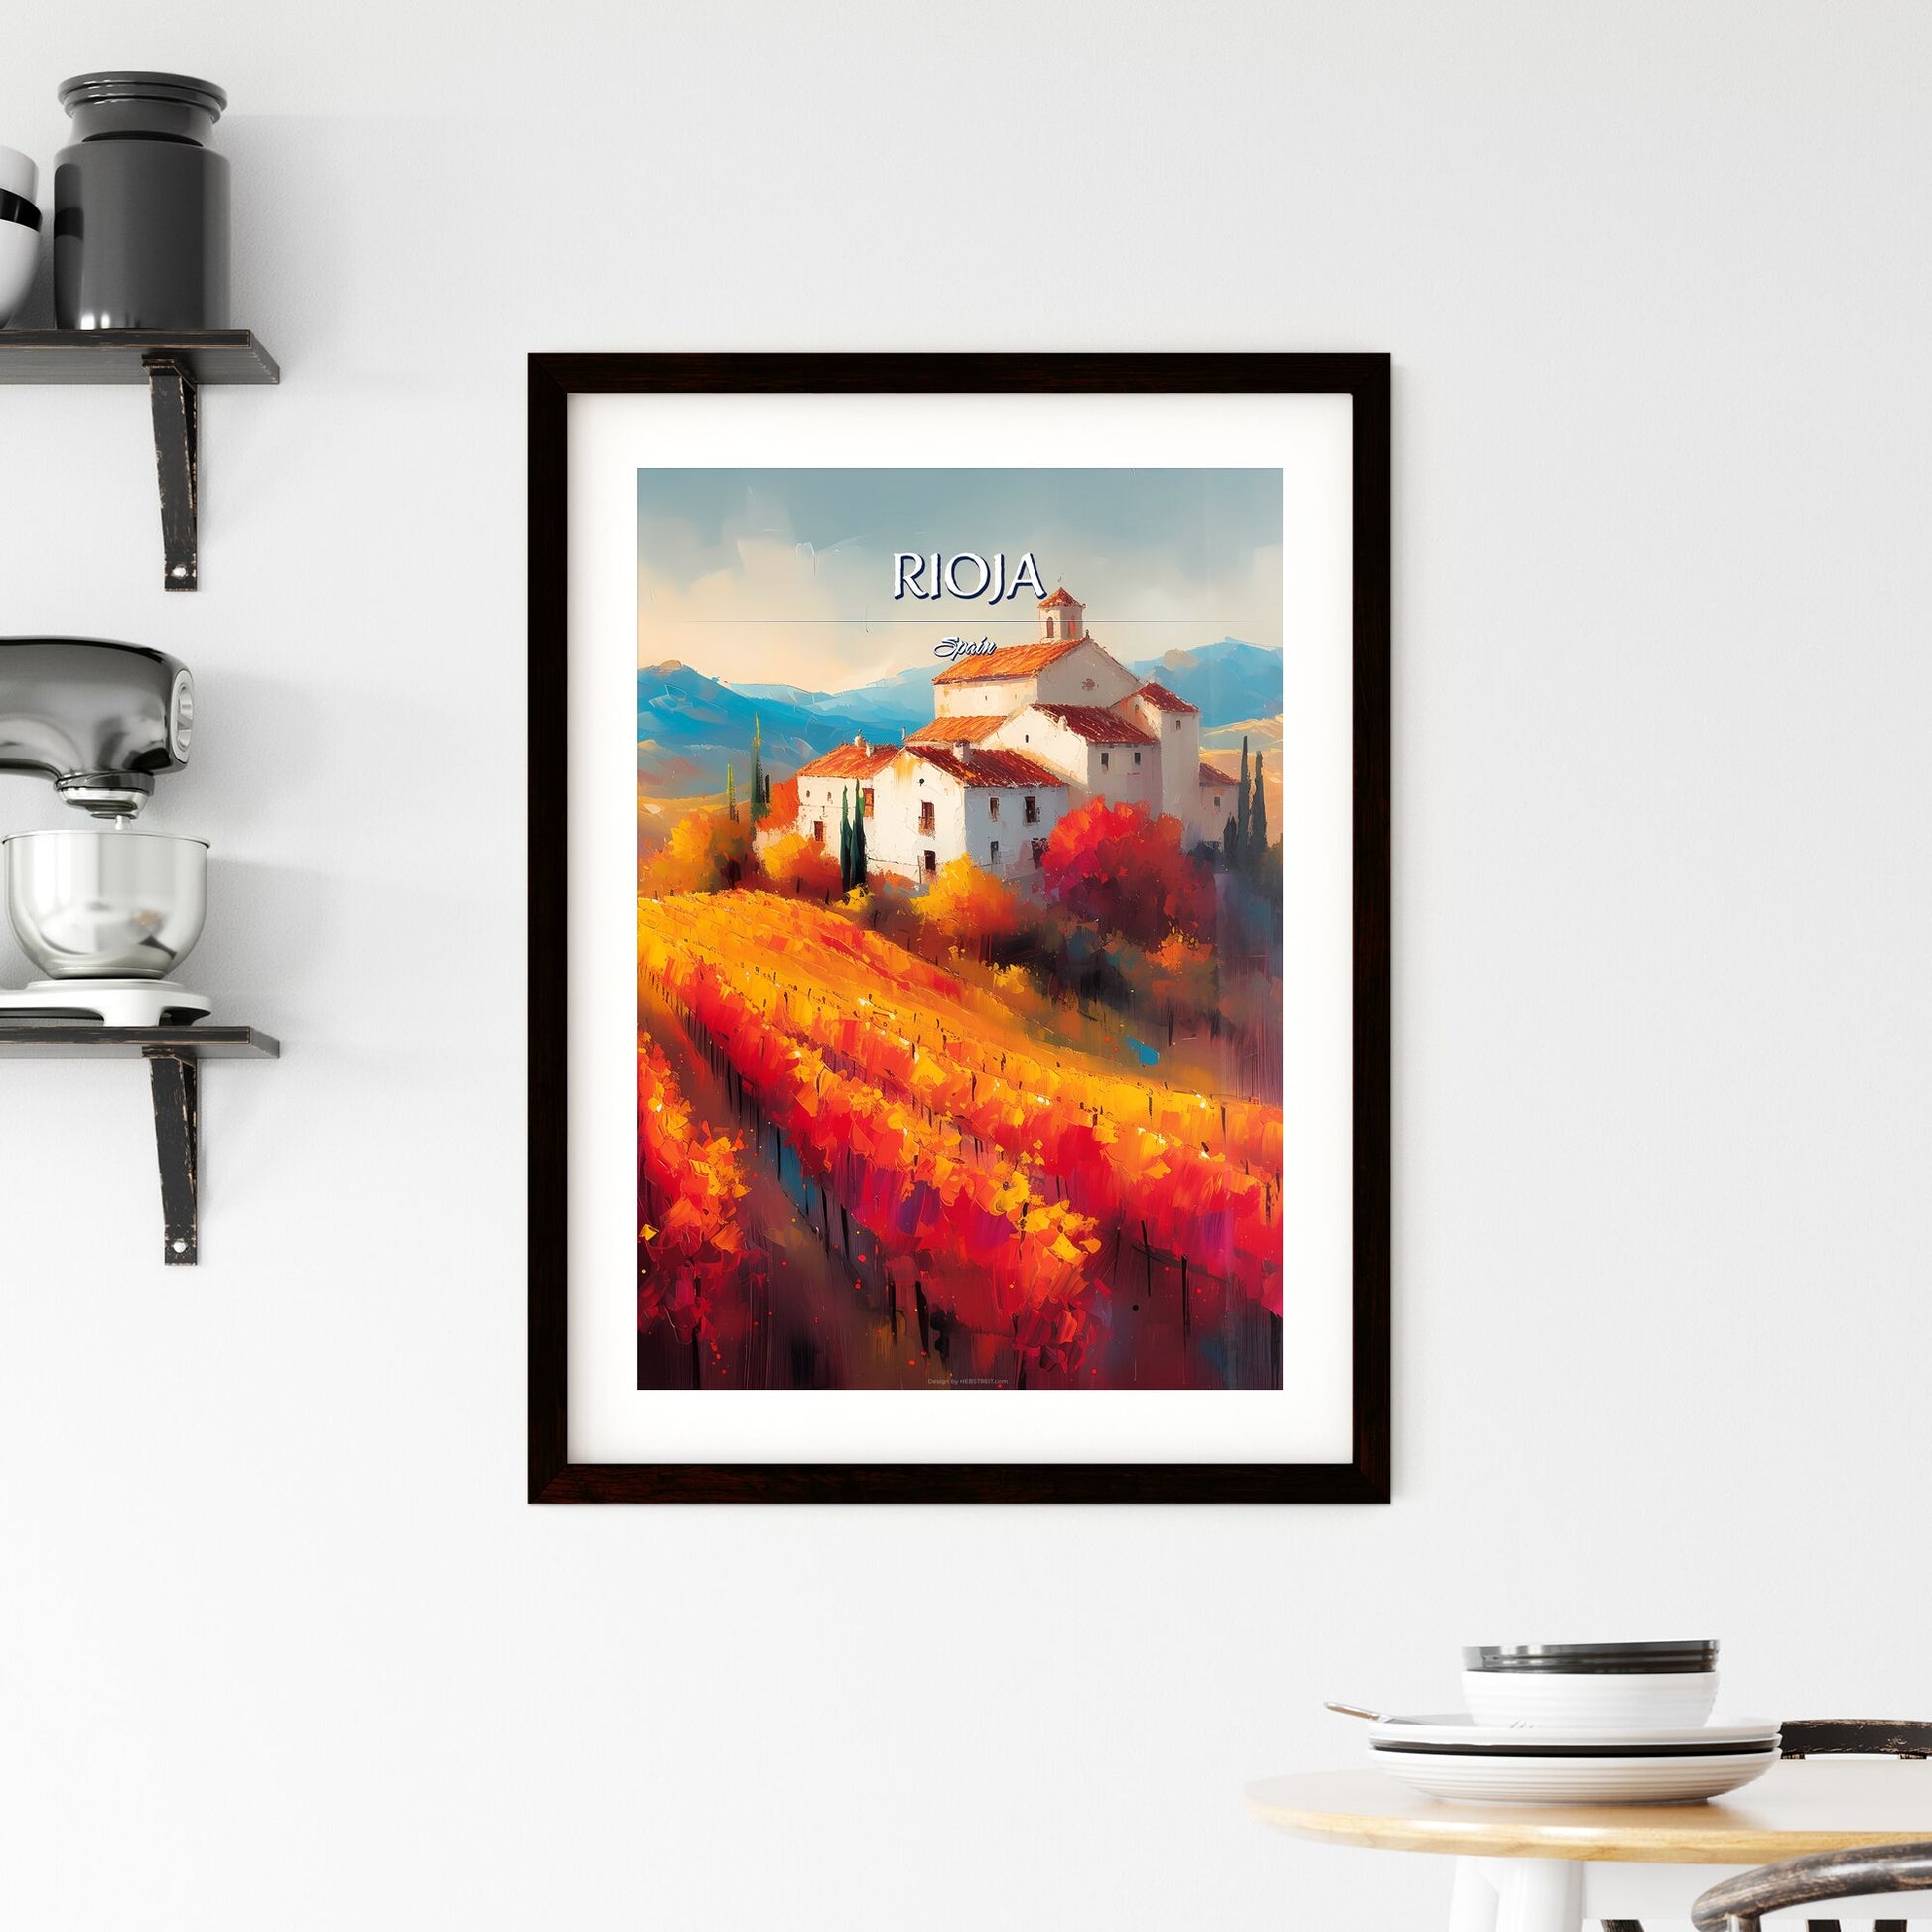 Rioja, Spain - Art print of a painting of a house on a hill with a vineyard Default Title